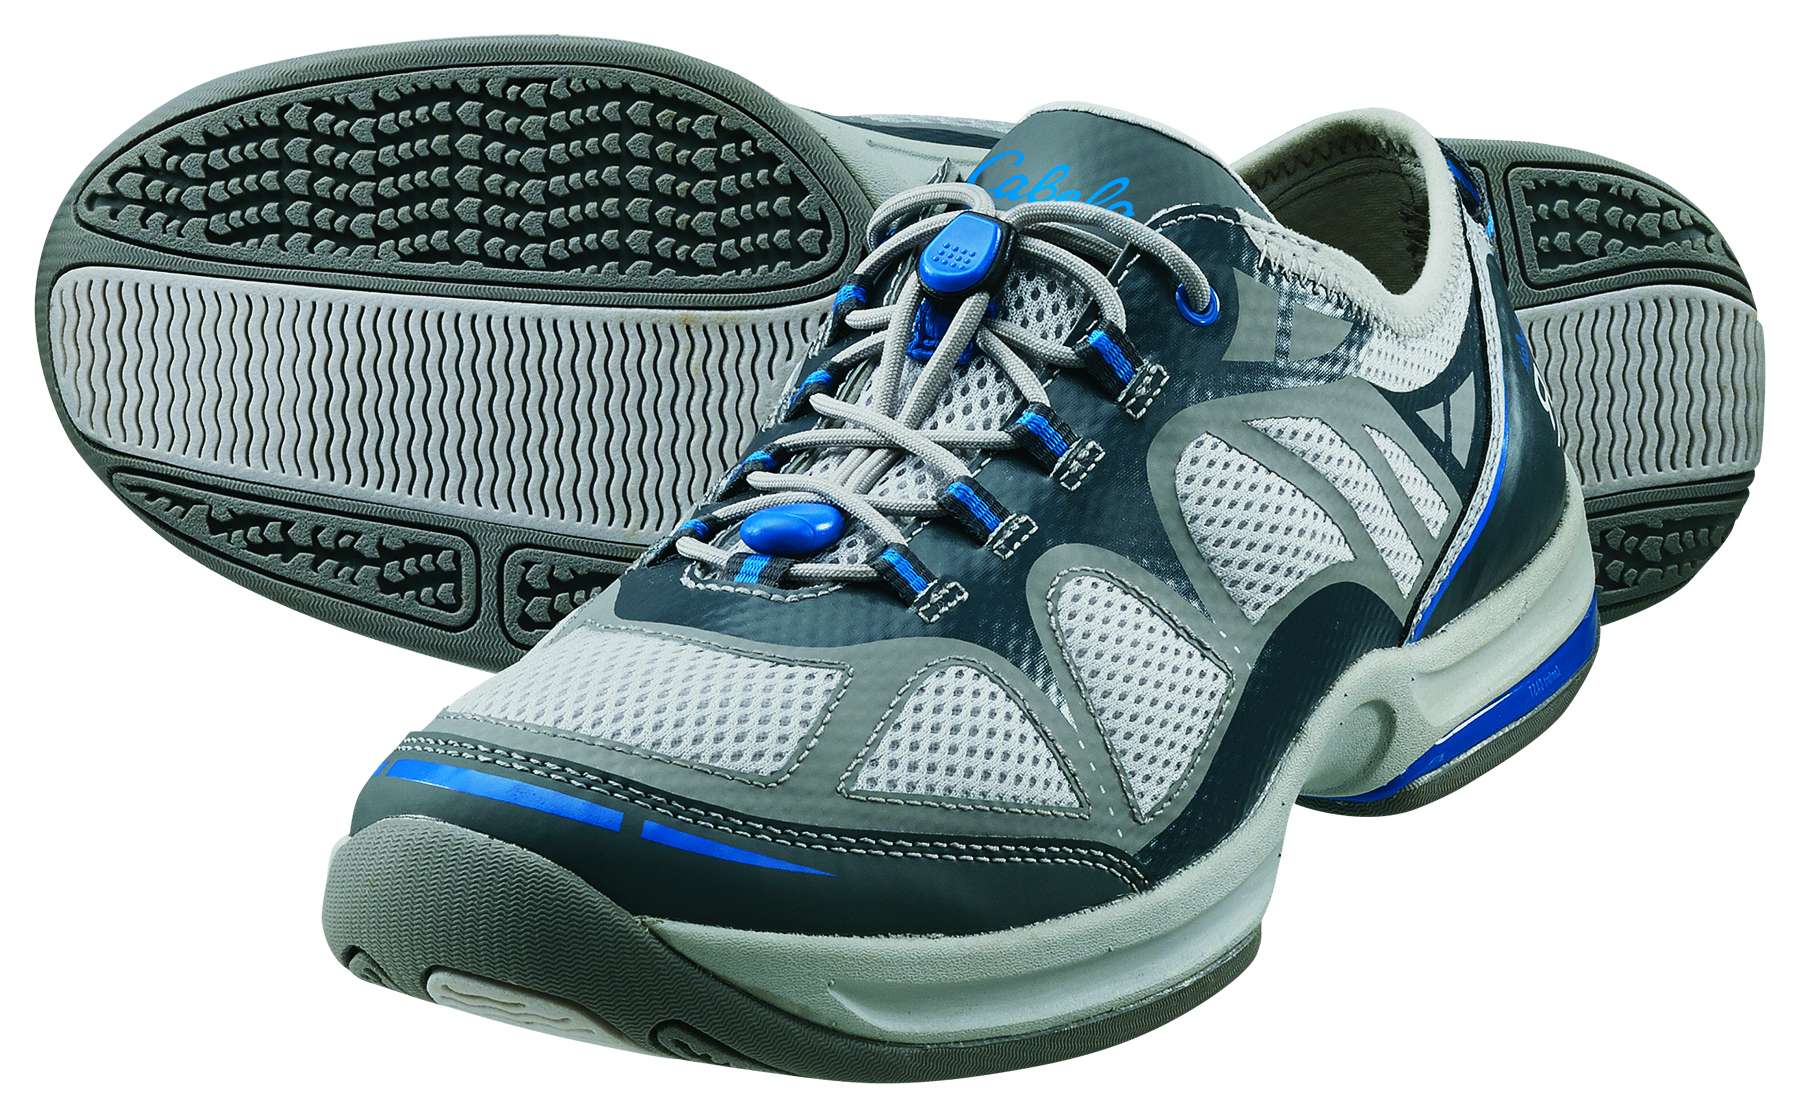 <b>Cabela's Guidewear Men's Fishing Shoes:</b> Comfort C.A.S.T. (Cushioning And Support Technology) reduces weight while adding rigidity and support where itâs needed most, and the lightweight, breathable synthetic and mesh uppers have draw-cord laces for easy on and off. Moisture-wicking, water-repellent TPE footbeds add even more cushioning. Odor-fighting treatment lets you wear them with or without socks. $100; <a href=